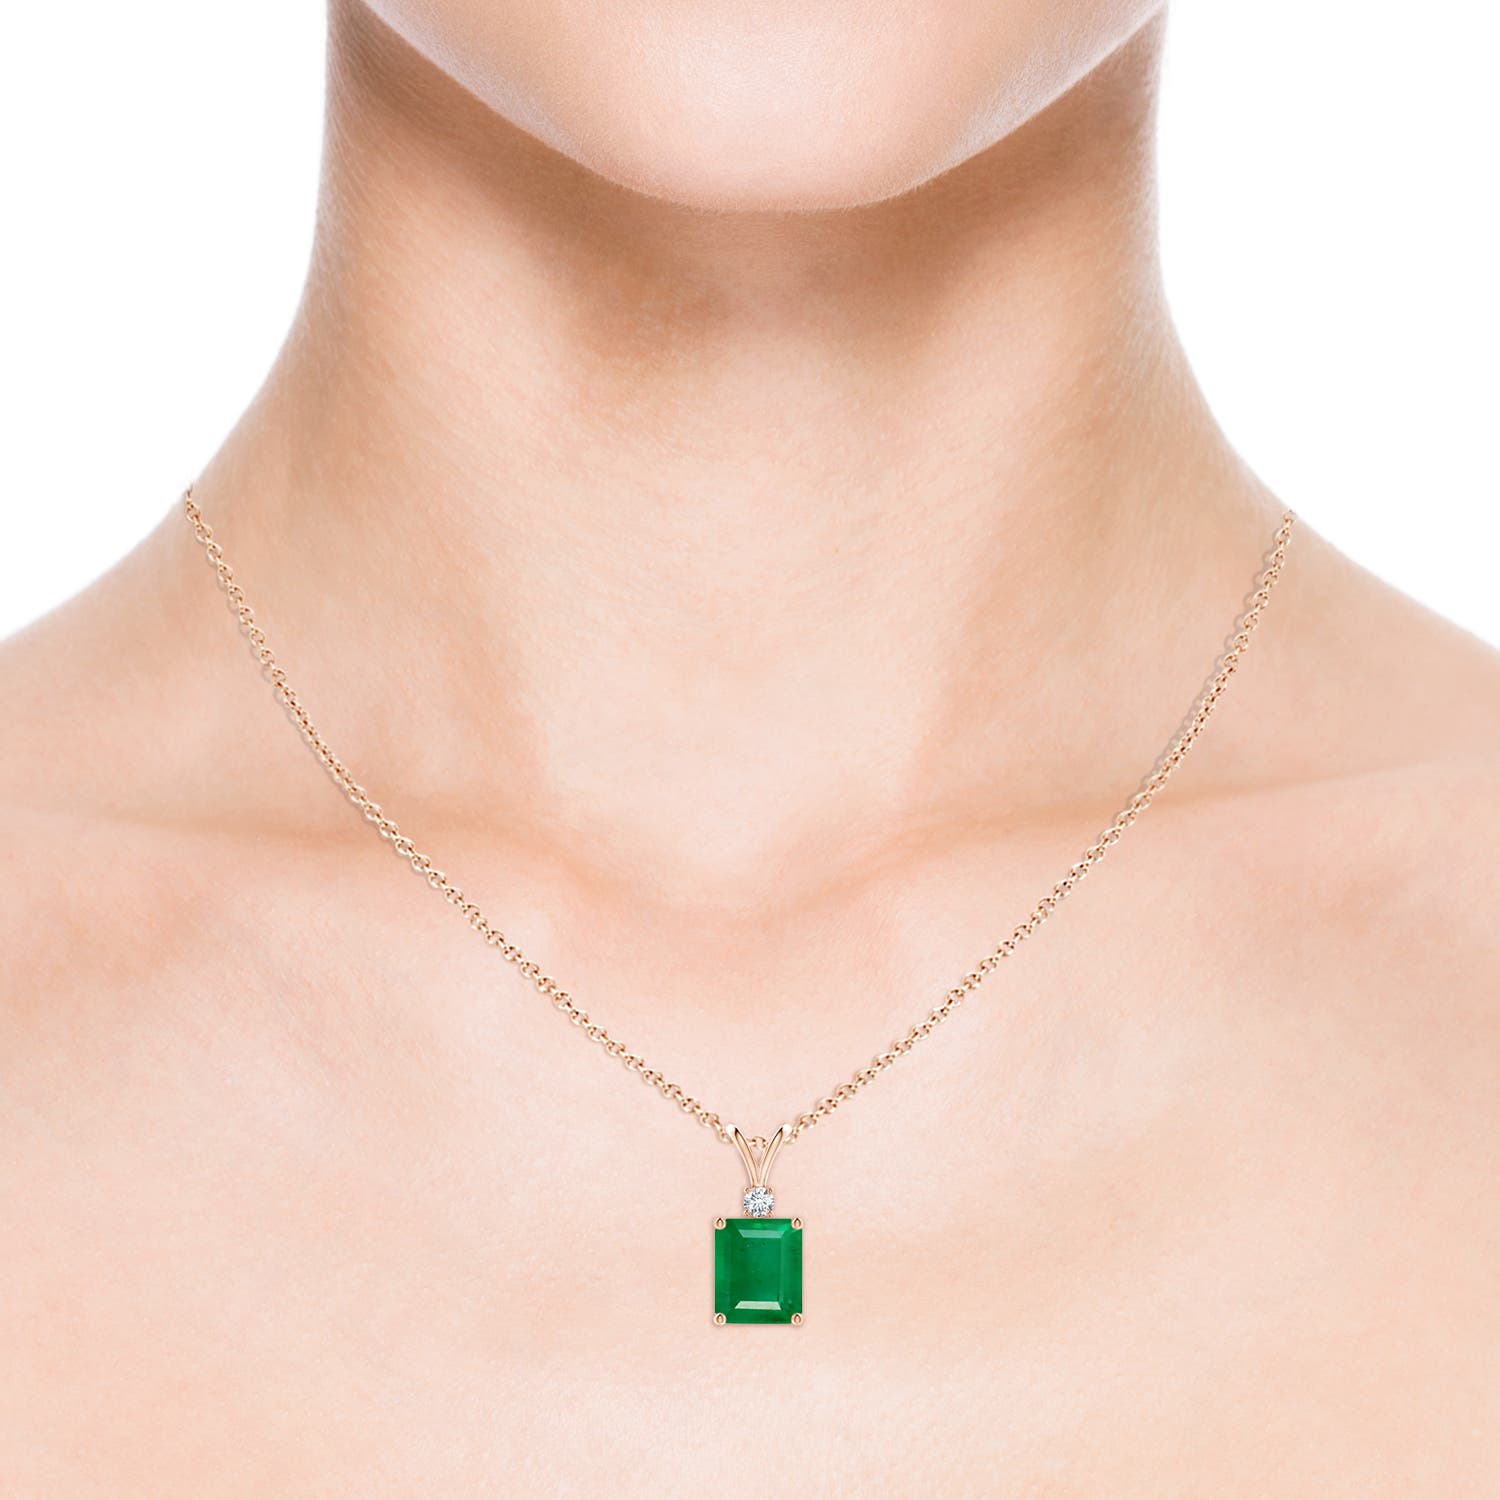 AA - Emerald / 5.91 CT / 14 KT Rose Gold